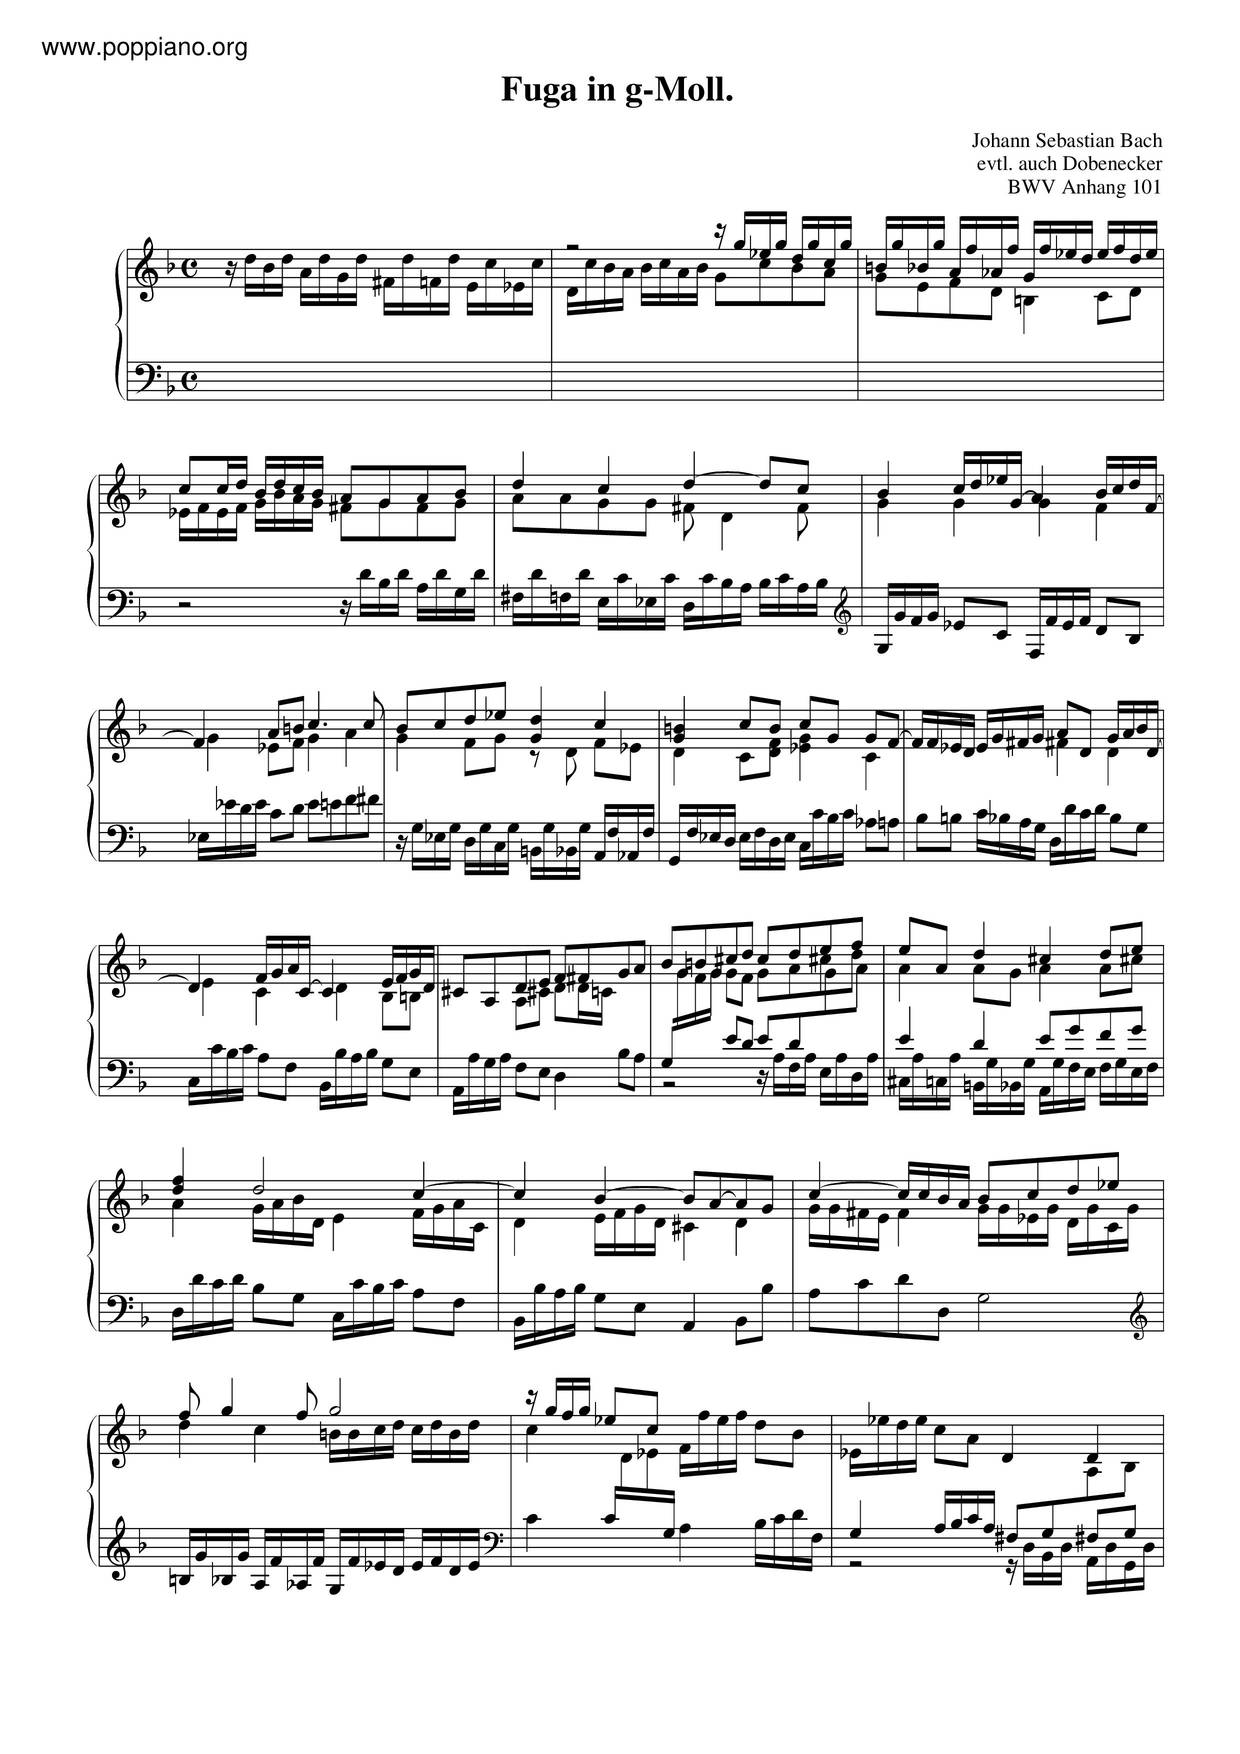 Fugue In G Minor, BWV Anh. 101 Score